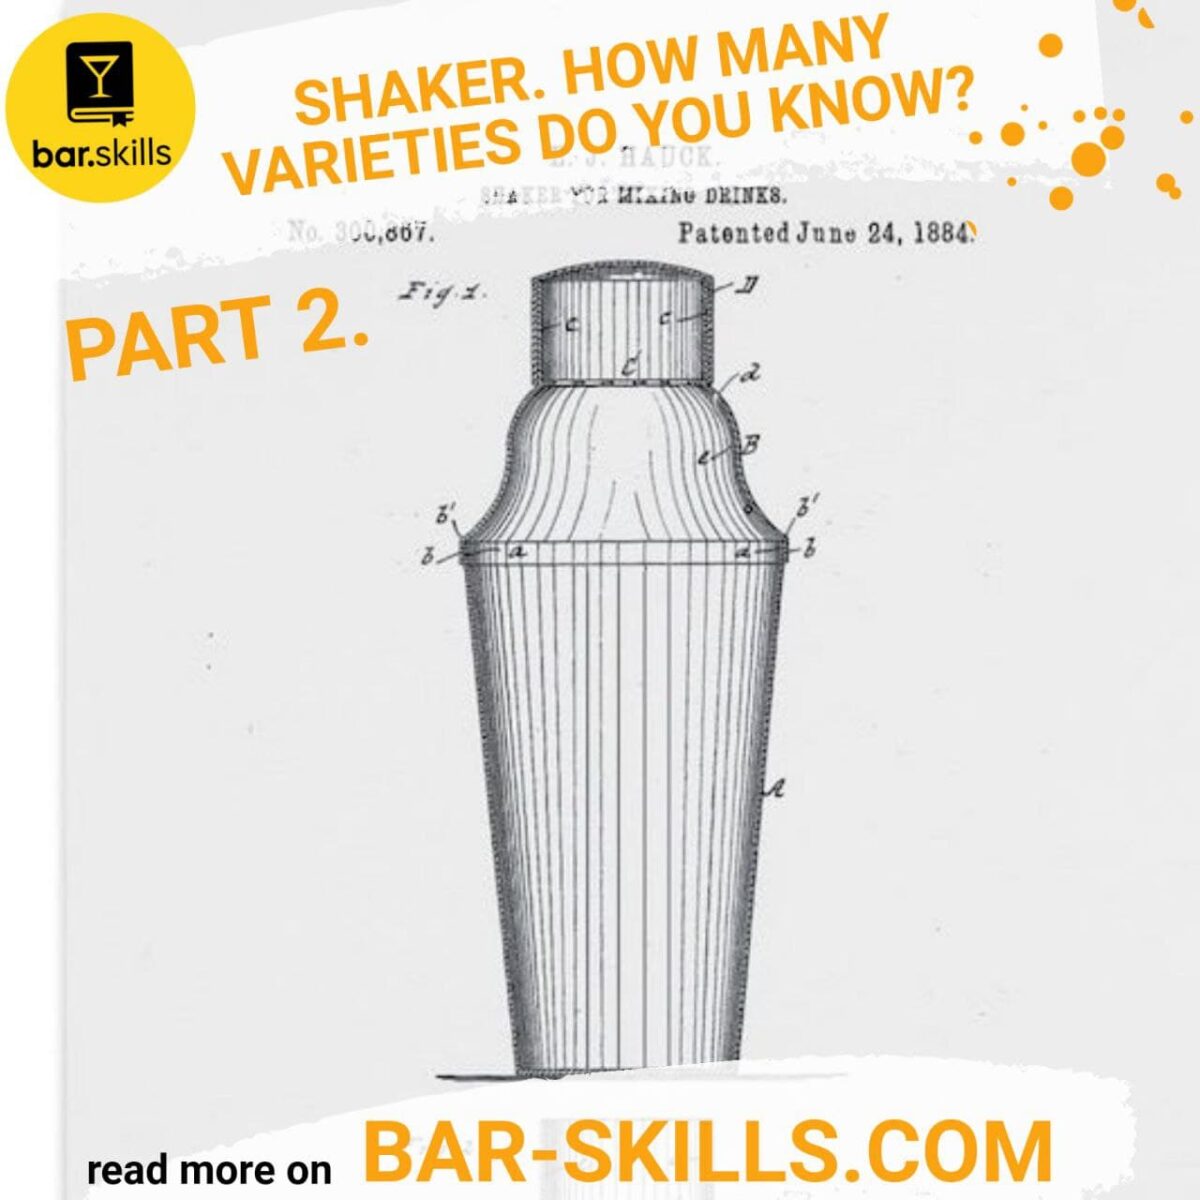 SHAKER. HOW MANY VARIETIES DO YOU KNOW